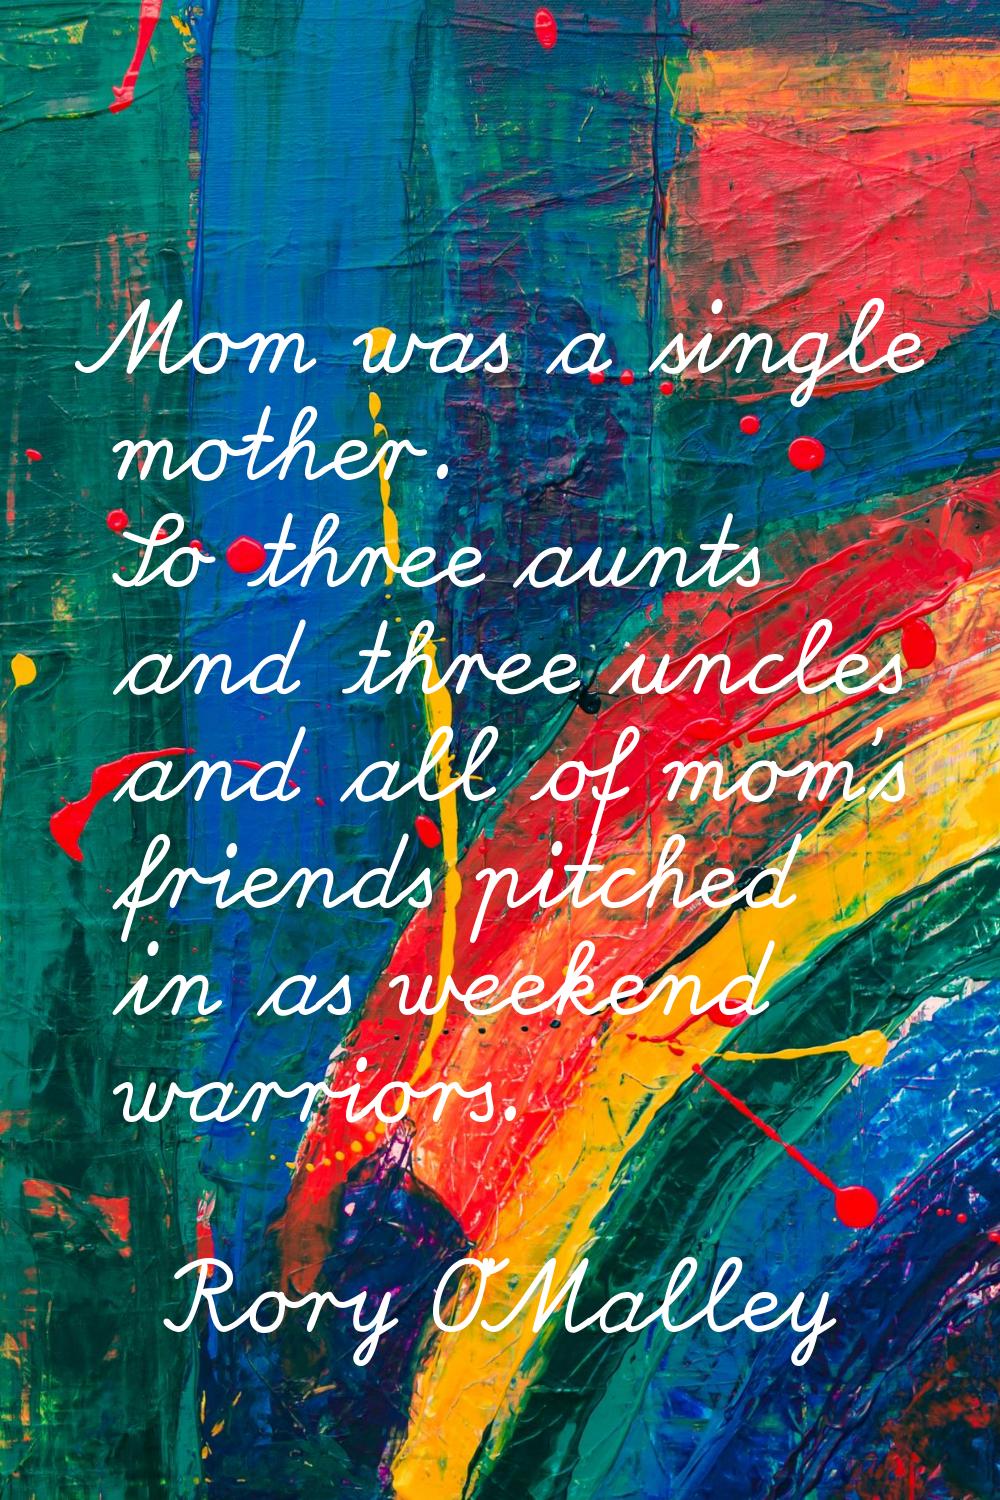 Mom was a single mother. So three aunts and three uncles and all of mom's friends pitched in as wee